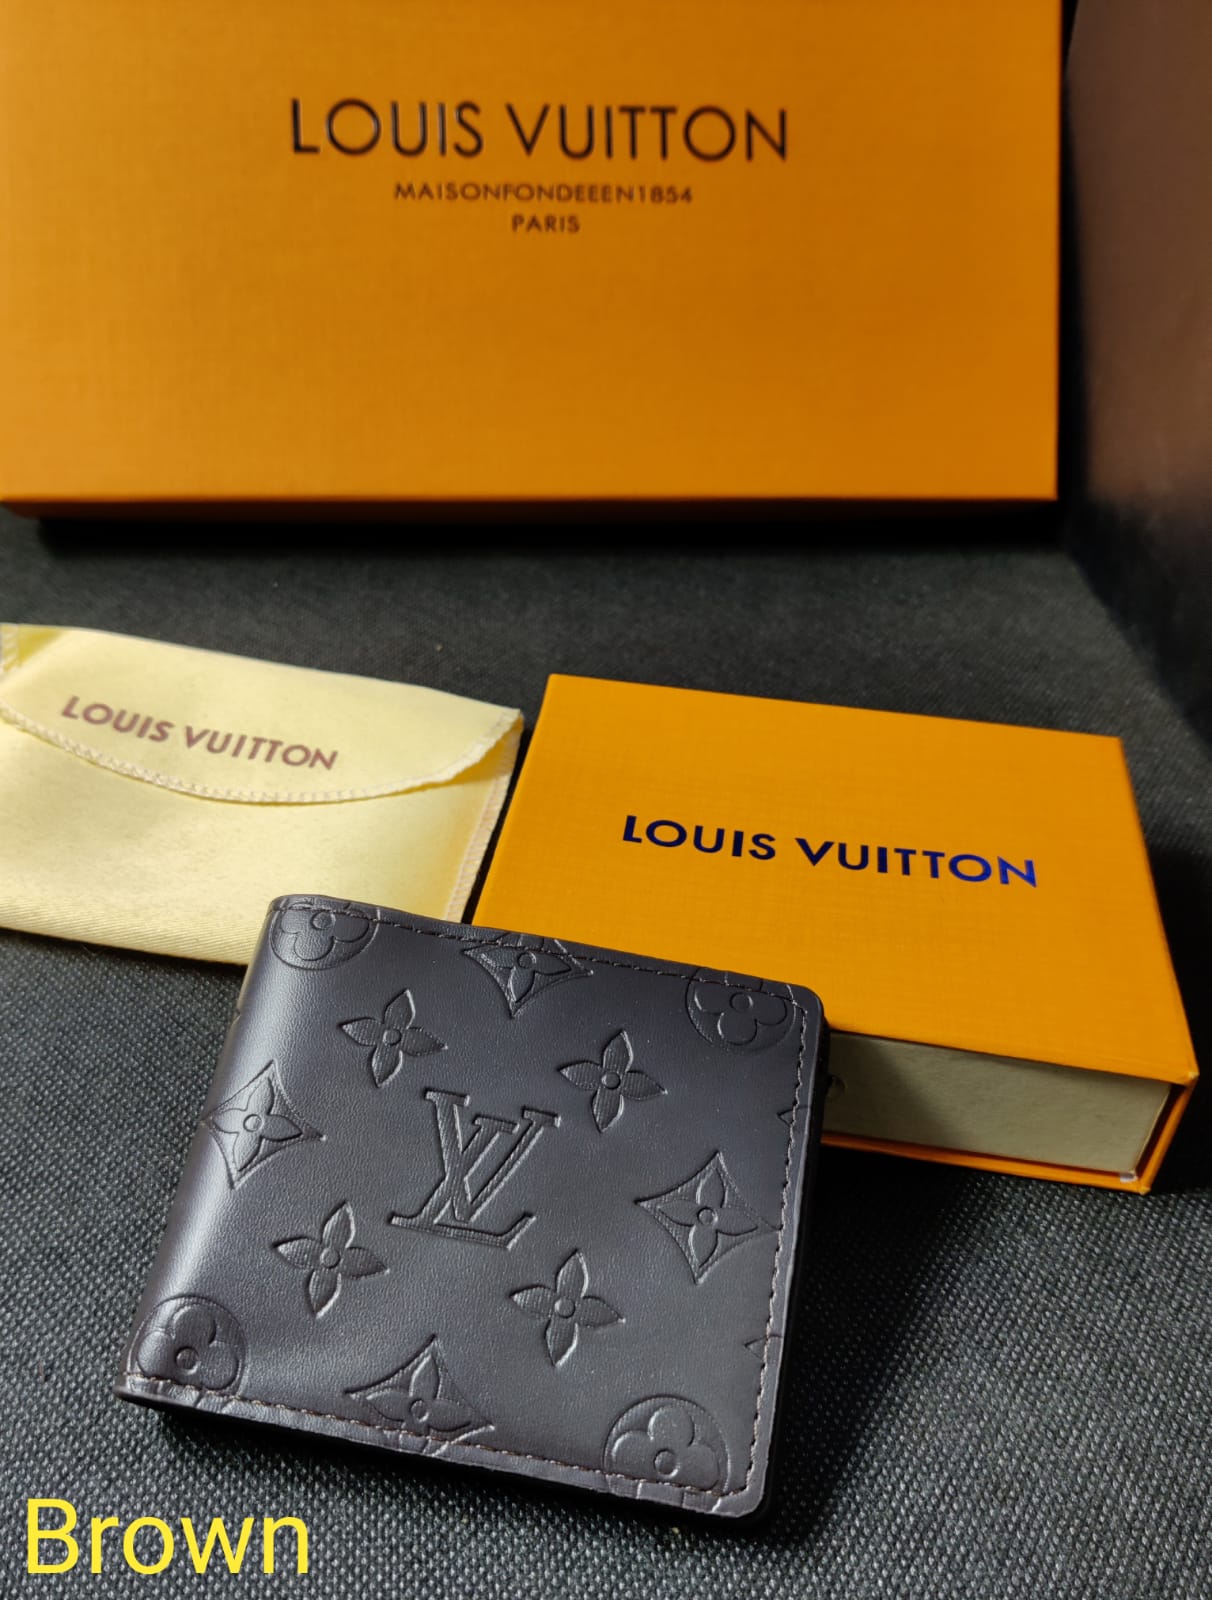 Louis Vuitton Leather Heavy quality Brown latest full printed design Fancy look wallet for men's LV-711